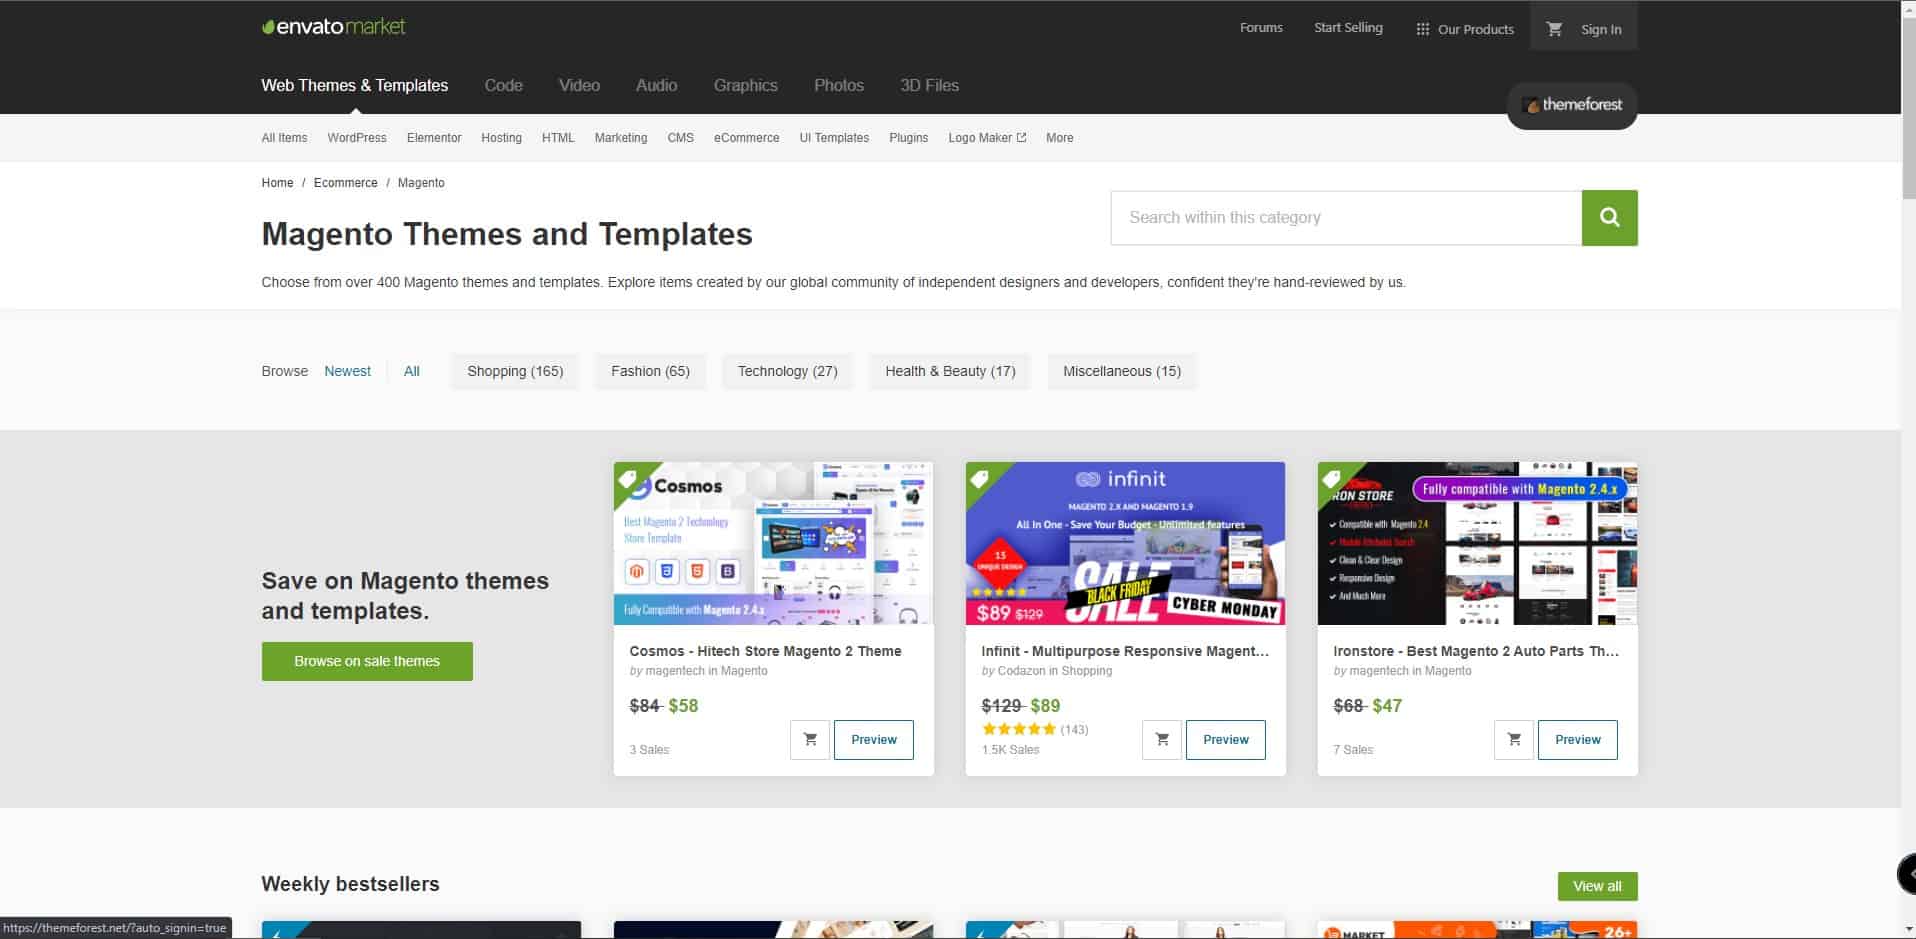 A website showing themes and templates for Magento